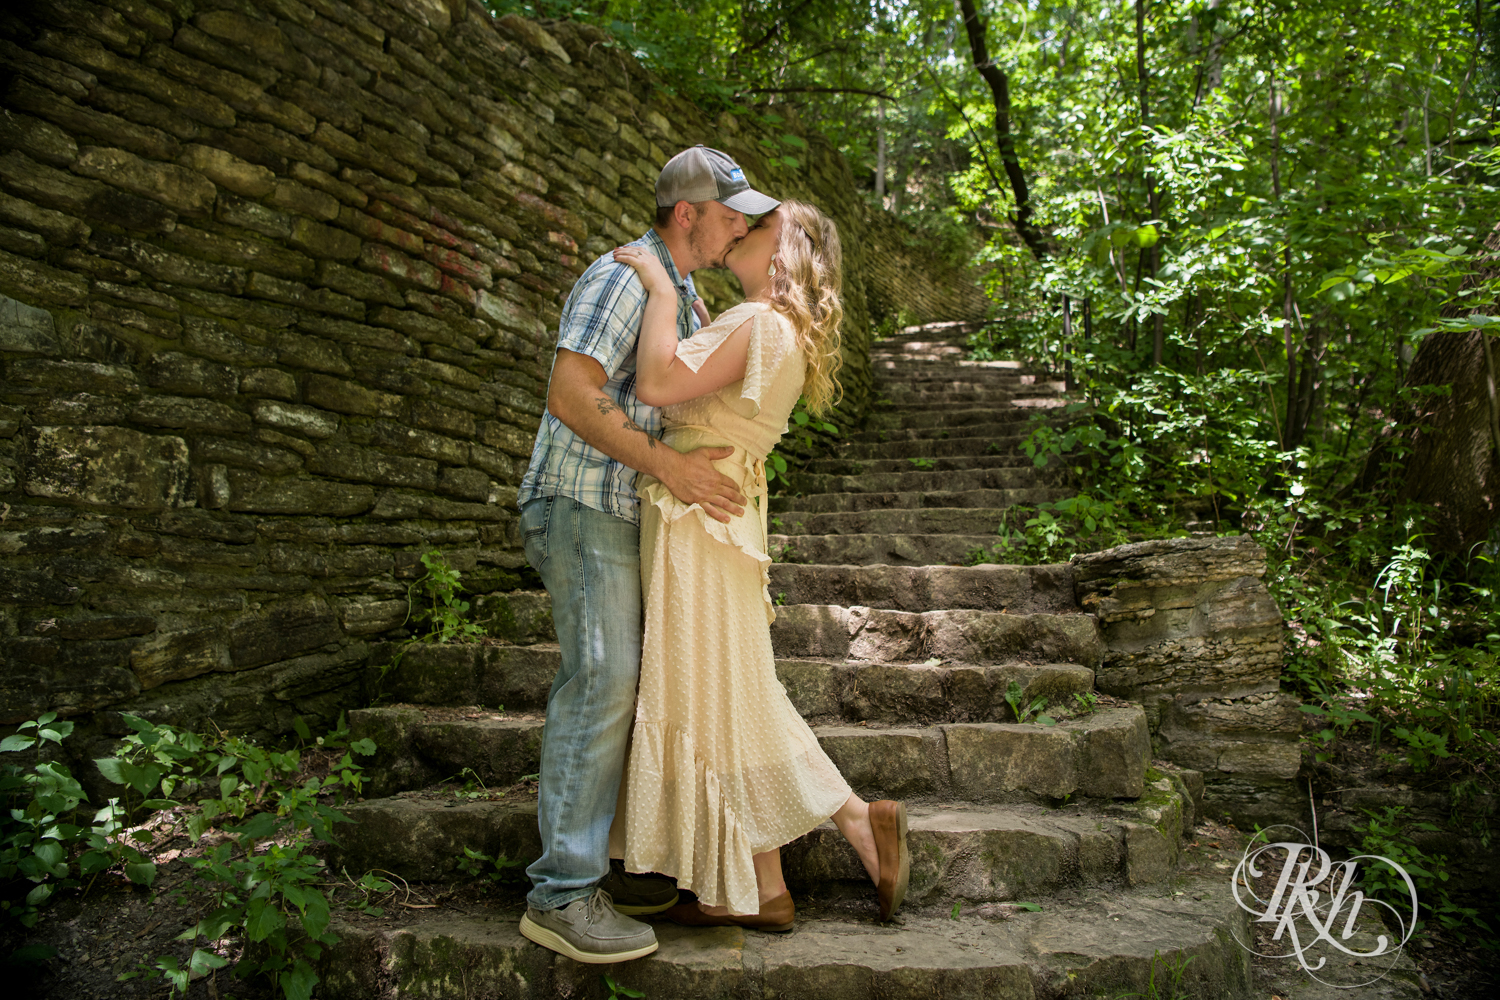 Man in jeans and woman in yellow dress kissing on outdoor stairs in Hidden Falls Regional Park in Saint Paul, Minnesota.